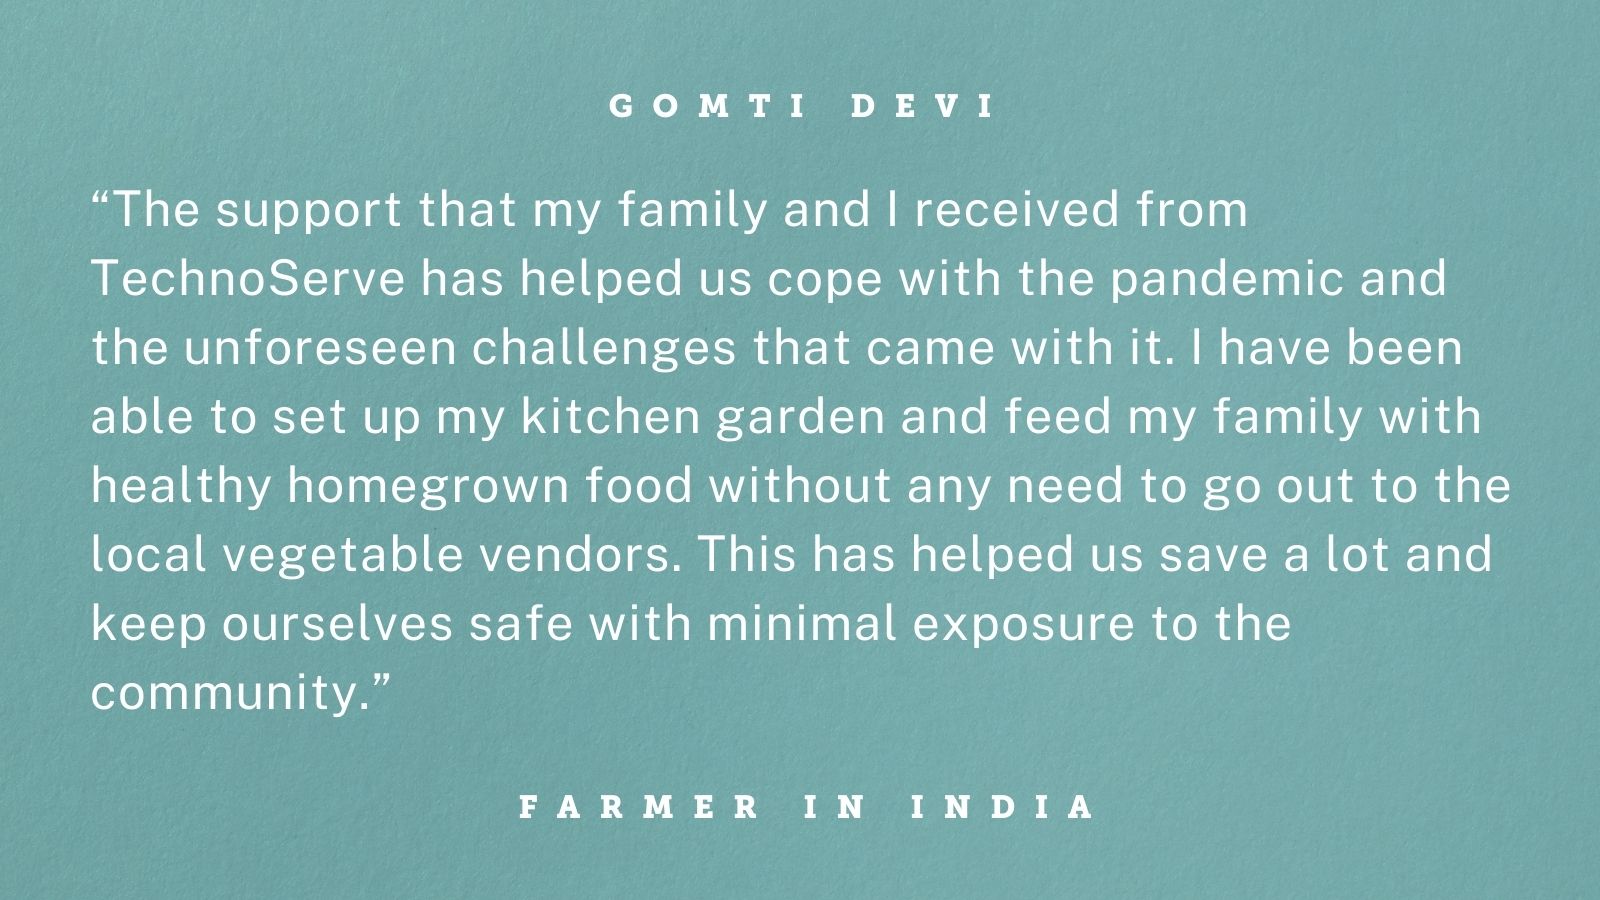 Quote from Gomti Devi, a smallholder guar farmer in Bikaner, Rajasthan, India, whose gender-inclusive training from TechnoServe helped her withstand the COVID-19 crisis. Graphic reads: “The support that my family and I received from TechnoServe has helped us cope with the pandemic and the unforeseen challenges that came with it. I have been able to set up my kitchen garden and feed my family with healthy homegrown food without any need to go out to the local vegetable vendors. This has helped us save a lot and keep ourselves safe with minimal exposure to the community.” 